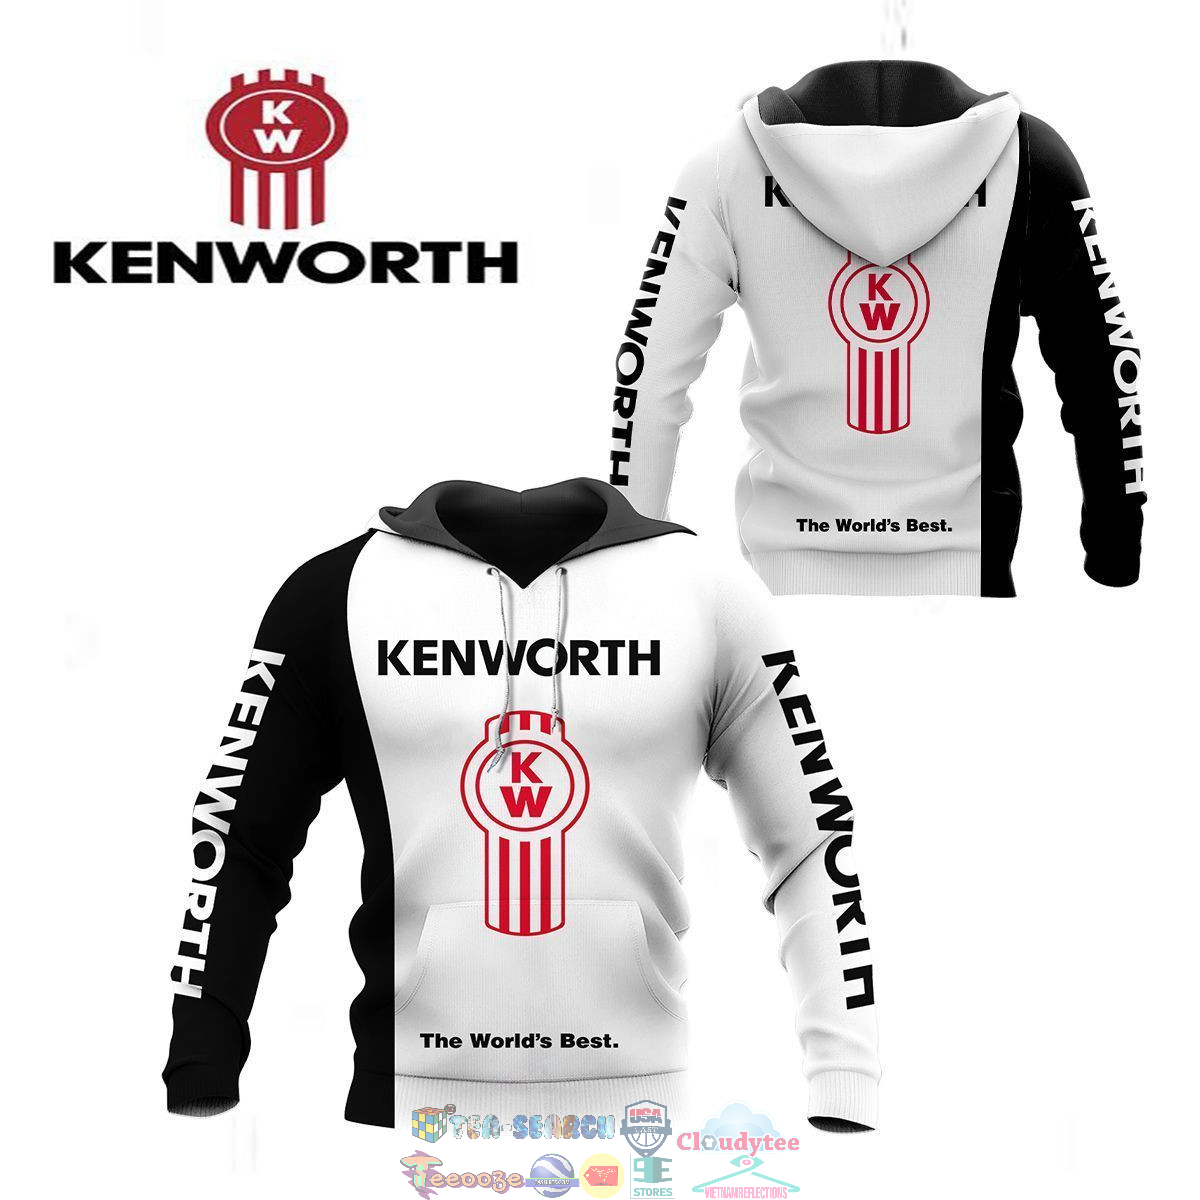 Kenworth ver 1 3D hoodie and t-shirt